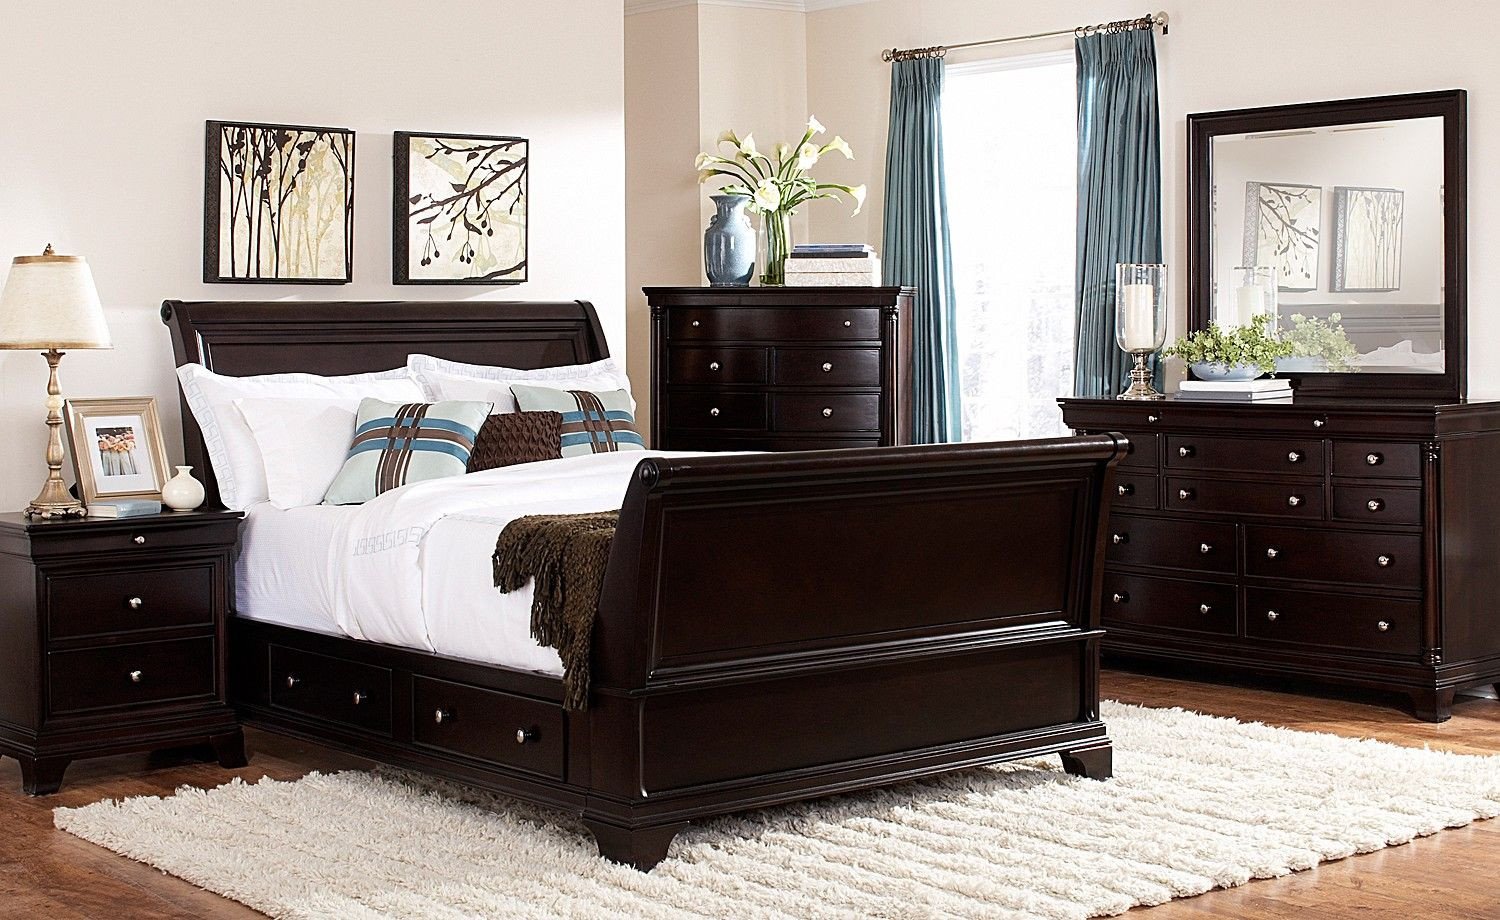 Black Full Size Bedroom Set Awesome Lakeshore Bedroom 7 Pc Queen Storage Bedroom Furniture